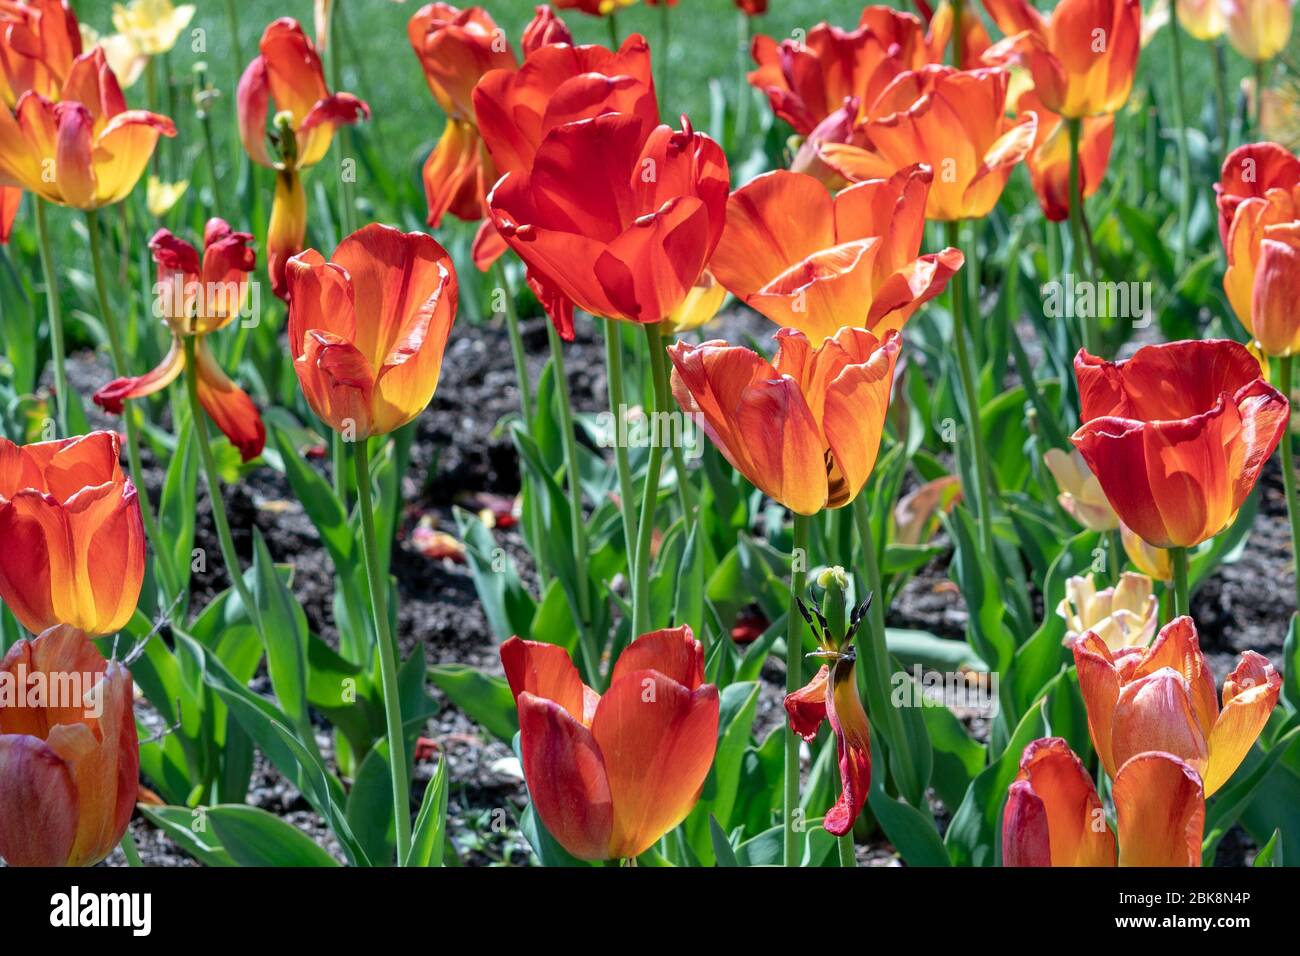 Fiery orange and red tulips in a flower garden. Tulips are members of the Lily family. Stock Photo